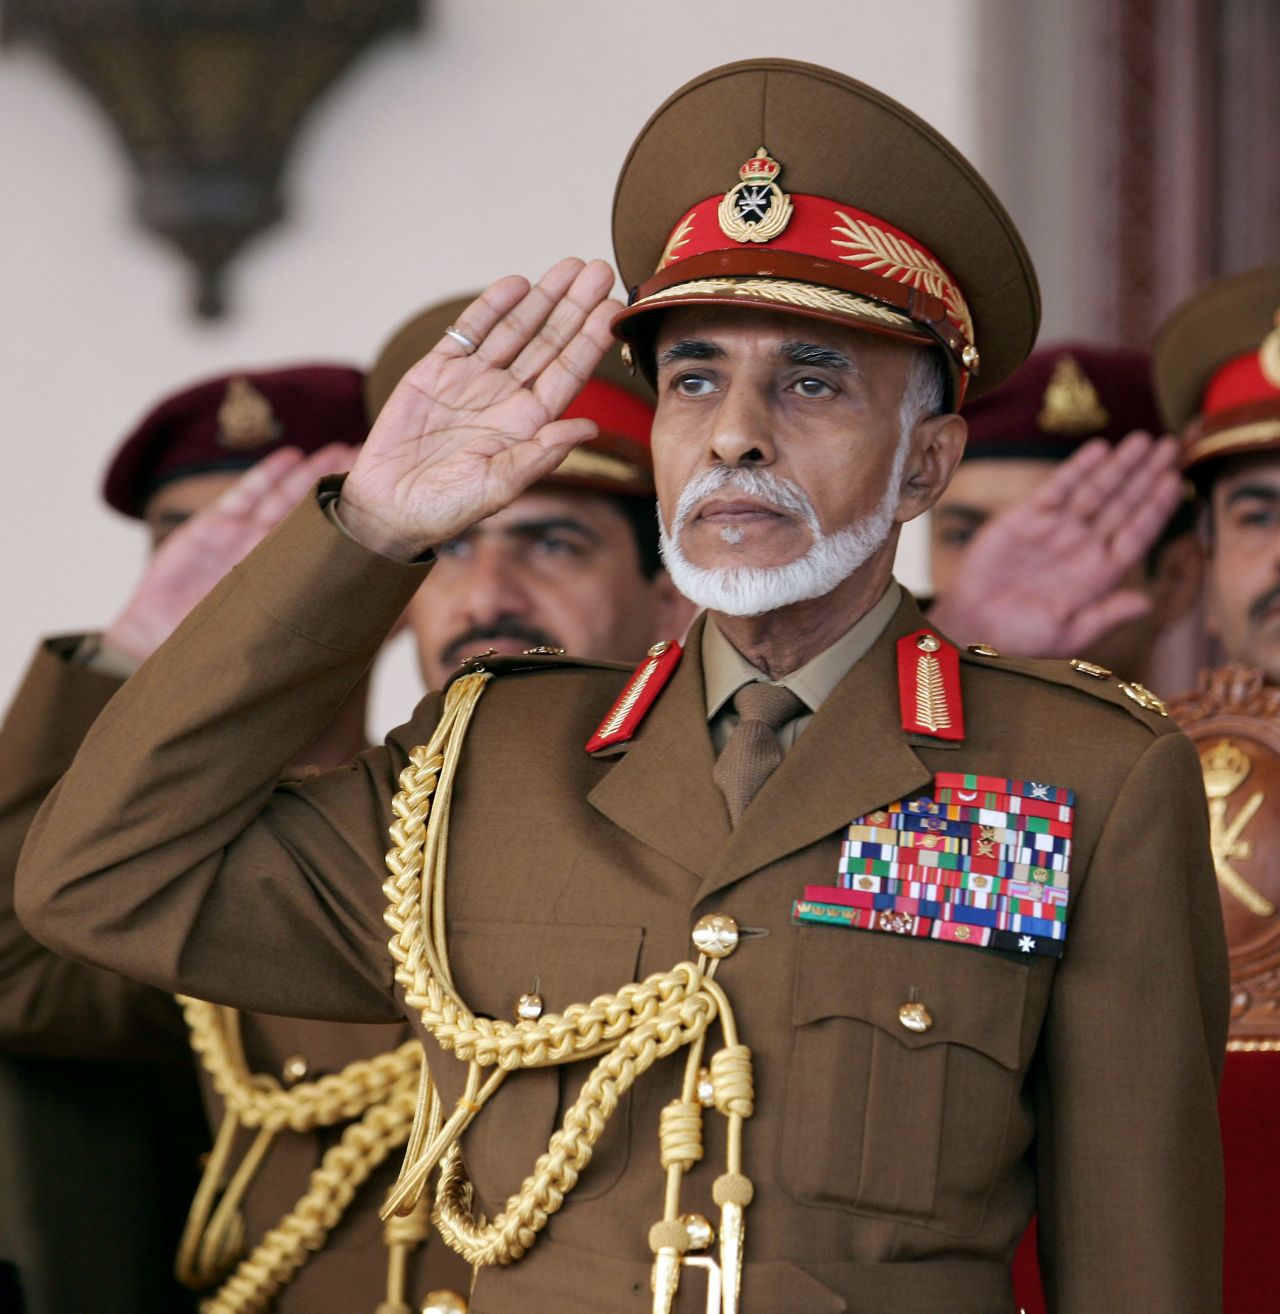 Sultan <a href="https://www.cnn.com/2020/01/11/middleeast/oman-sultan-qaboos-bin-said-death-intl/index.html" target="_blank">Qaboos bin Said</a>, who ruled Oman since 1970, died January 10, according to the official Oman News Agency. He died at age 79 and was the longest-serving Arab leader.